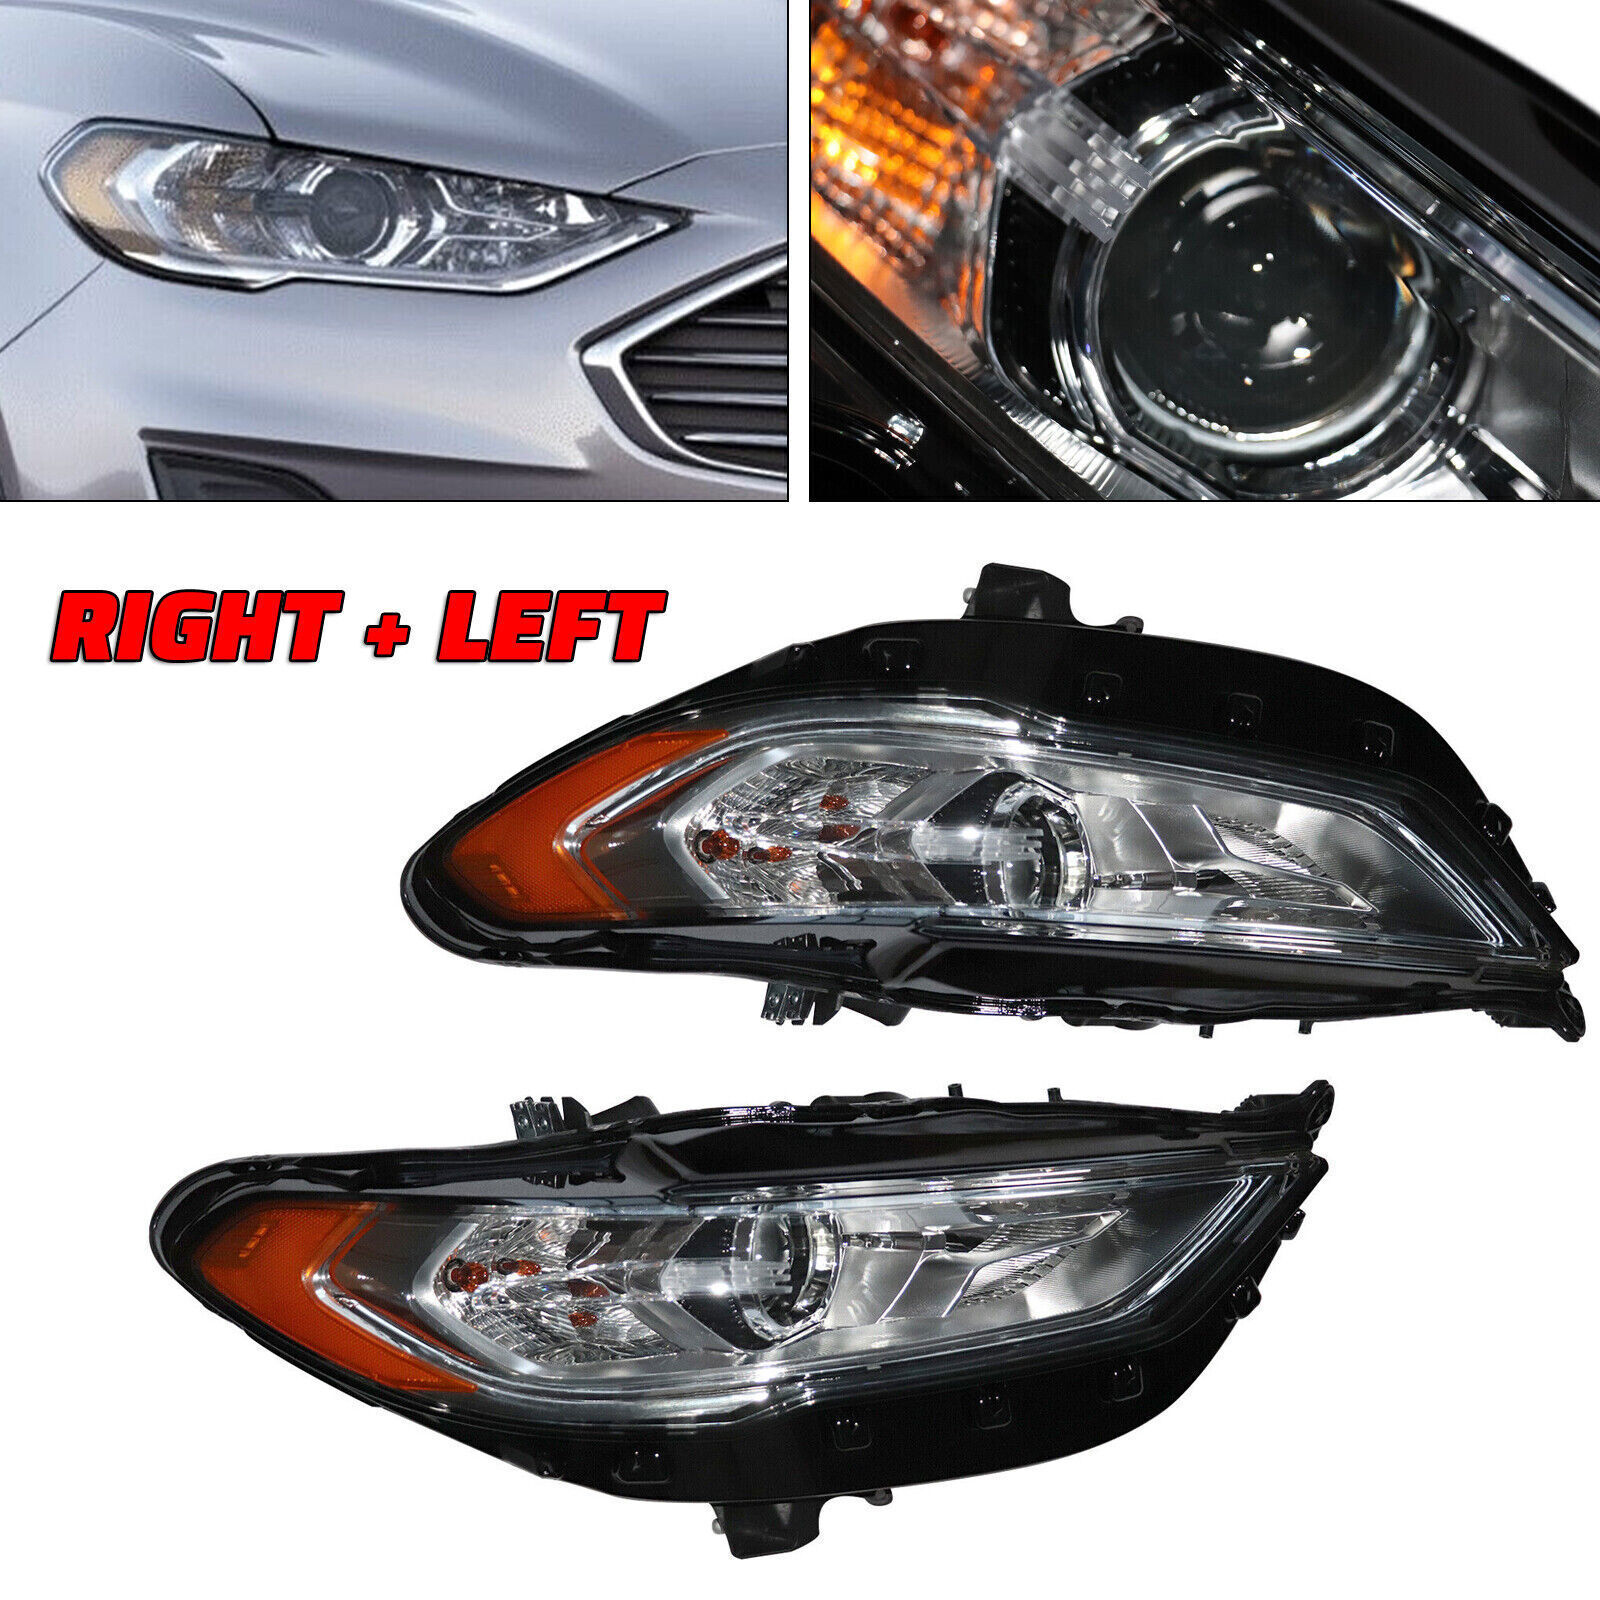 Pair of Headlight For 2017-20 Ford Fusion Auto LH+RH Headlamp (For: Ford Fusion)